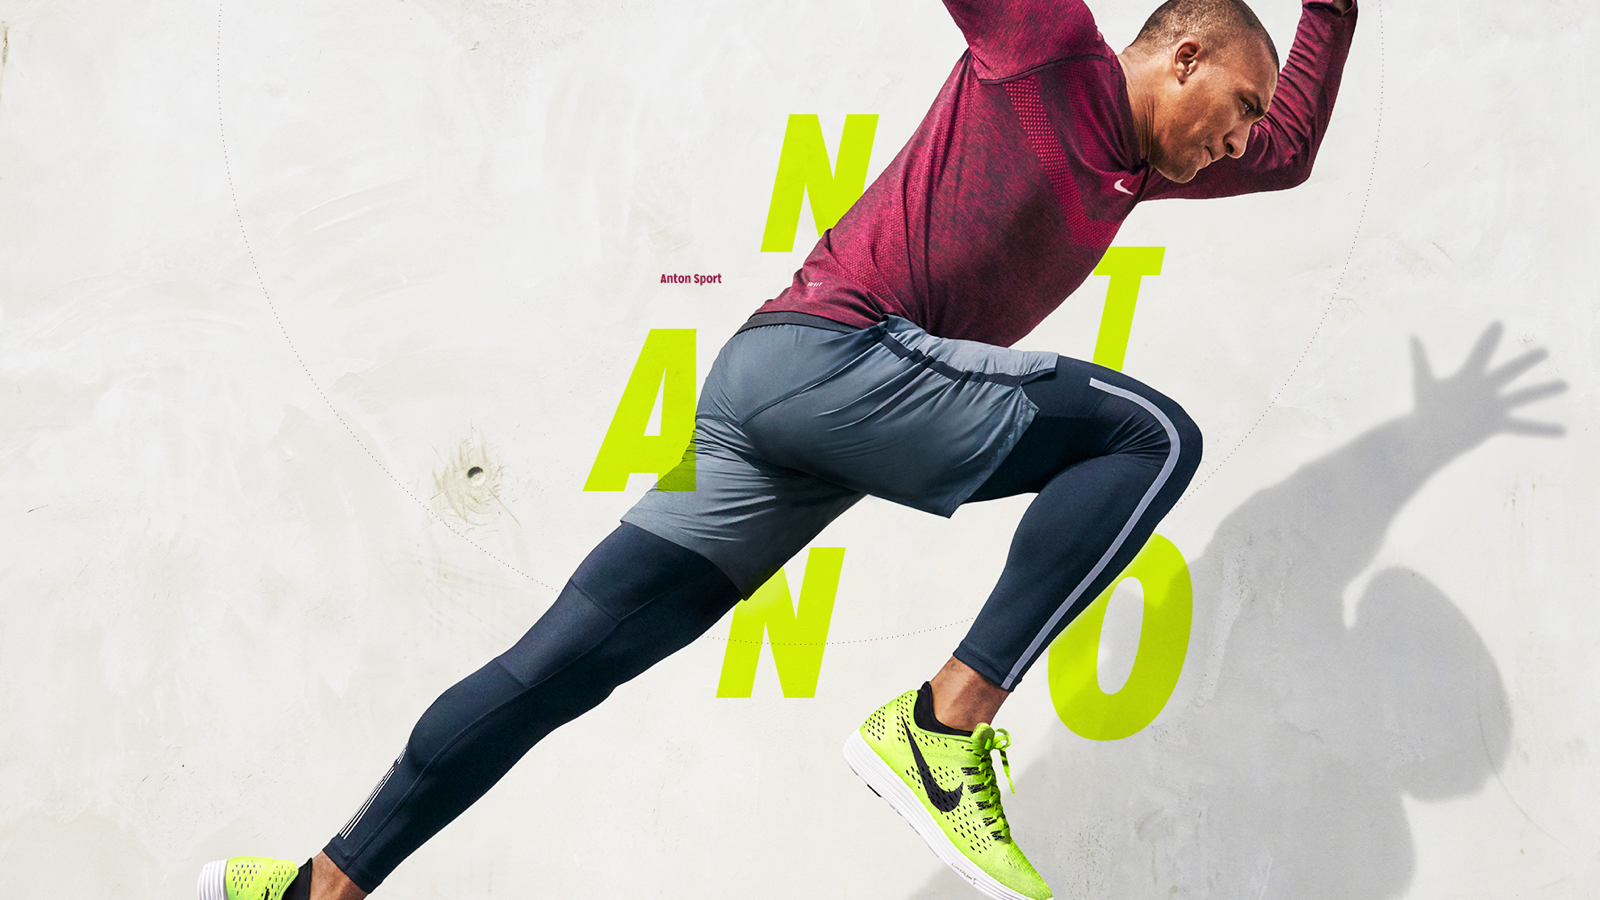 Anton Sport. How a small retailer succeeded with… | by Unfold | Unfold  Stories | Medium